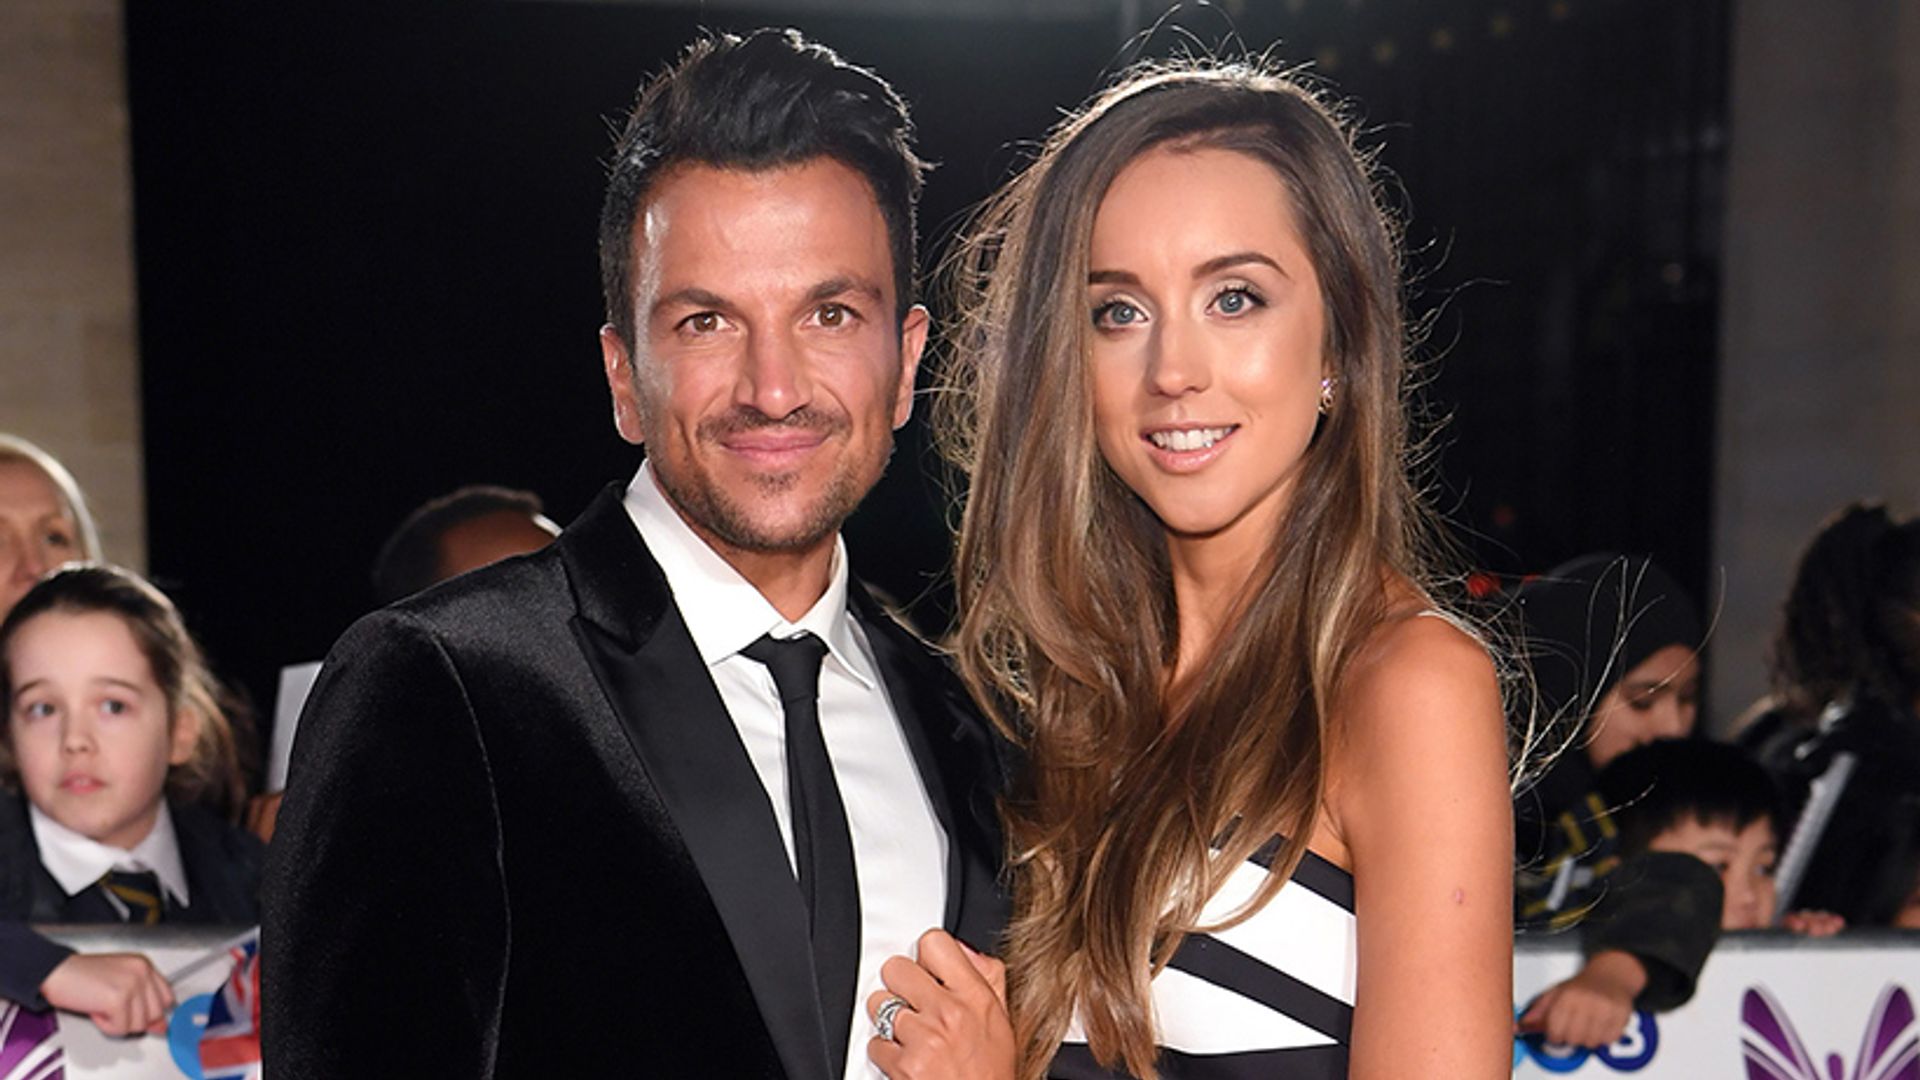 Peter Andre and wife Emily MacDonagh stun at Pride of Britain | HELLO!